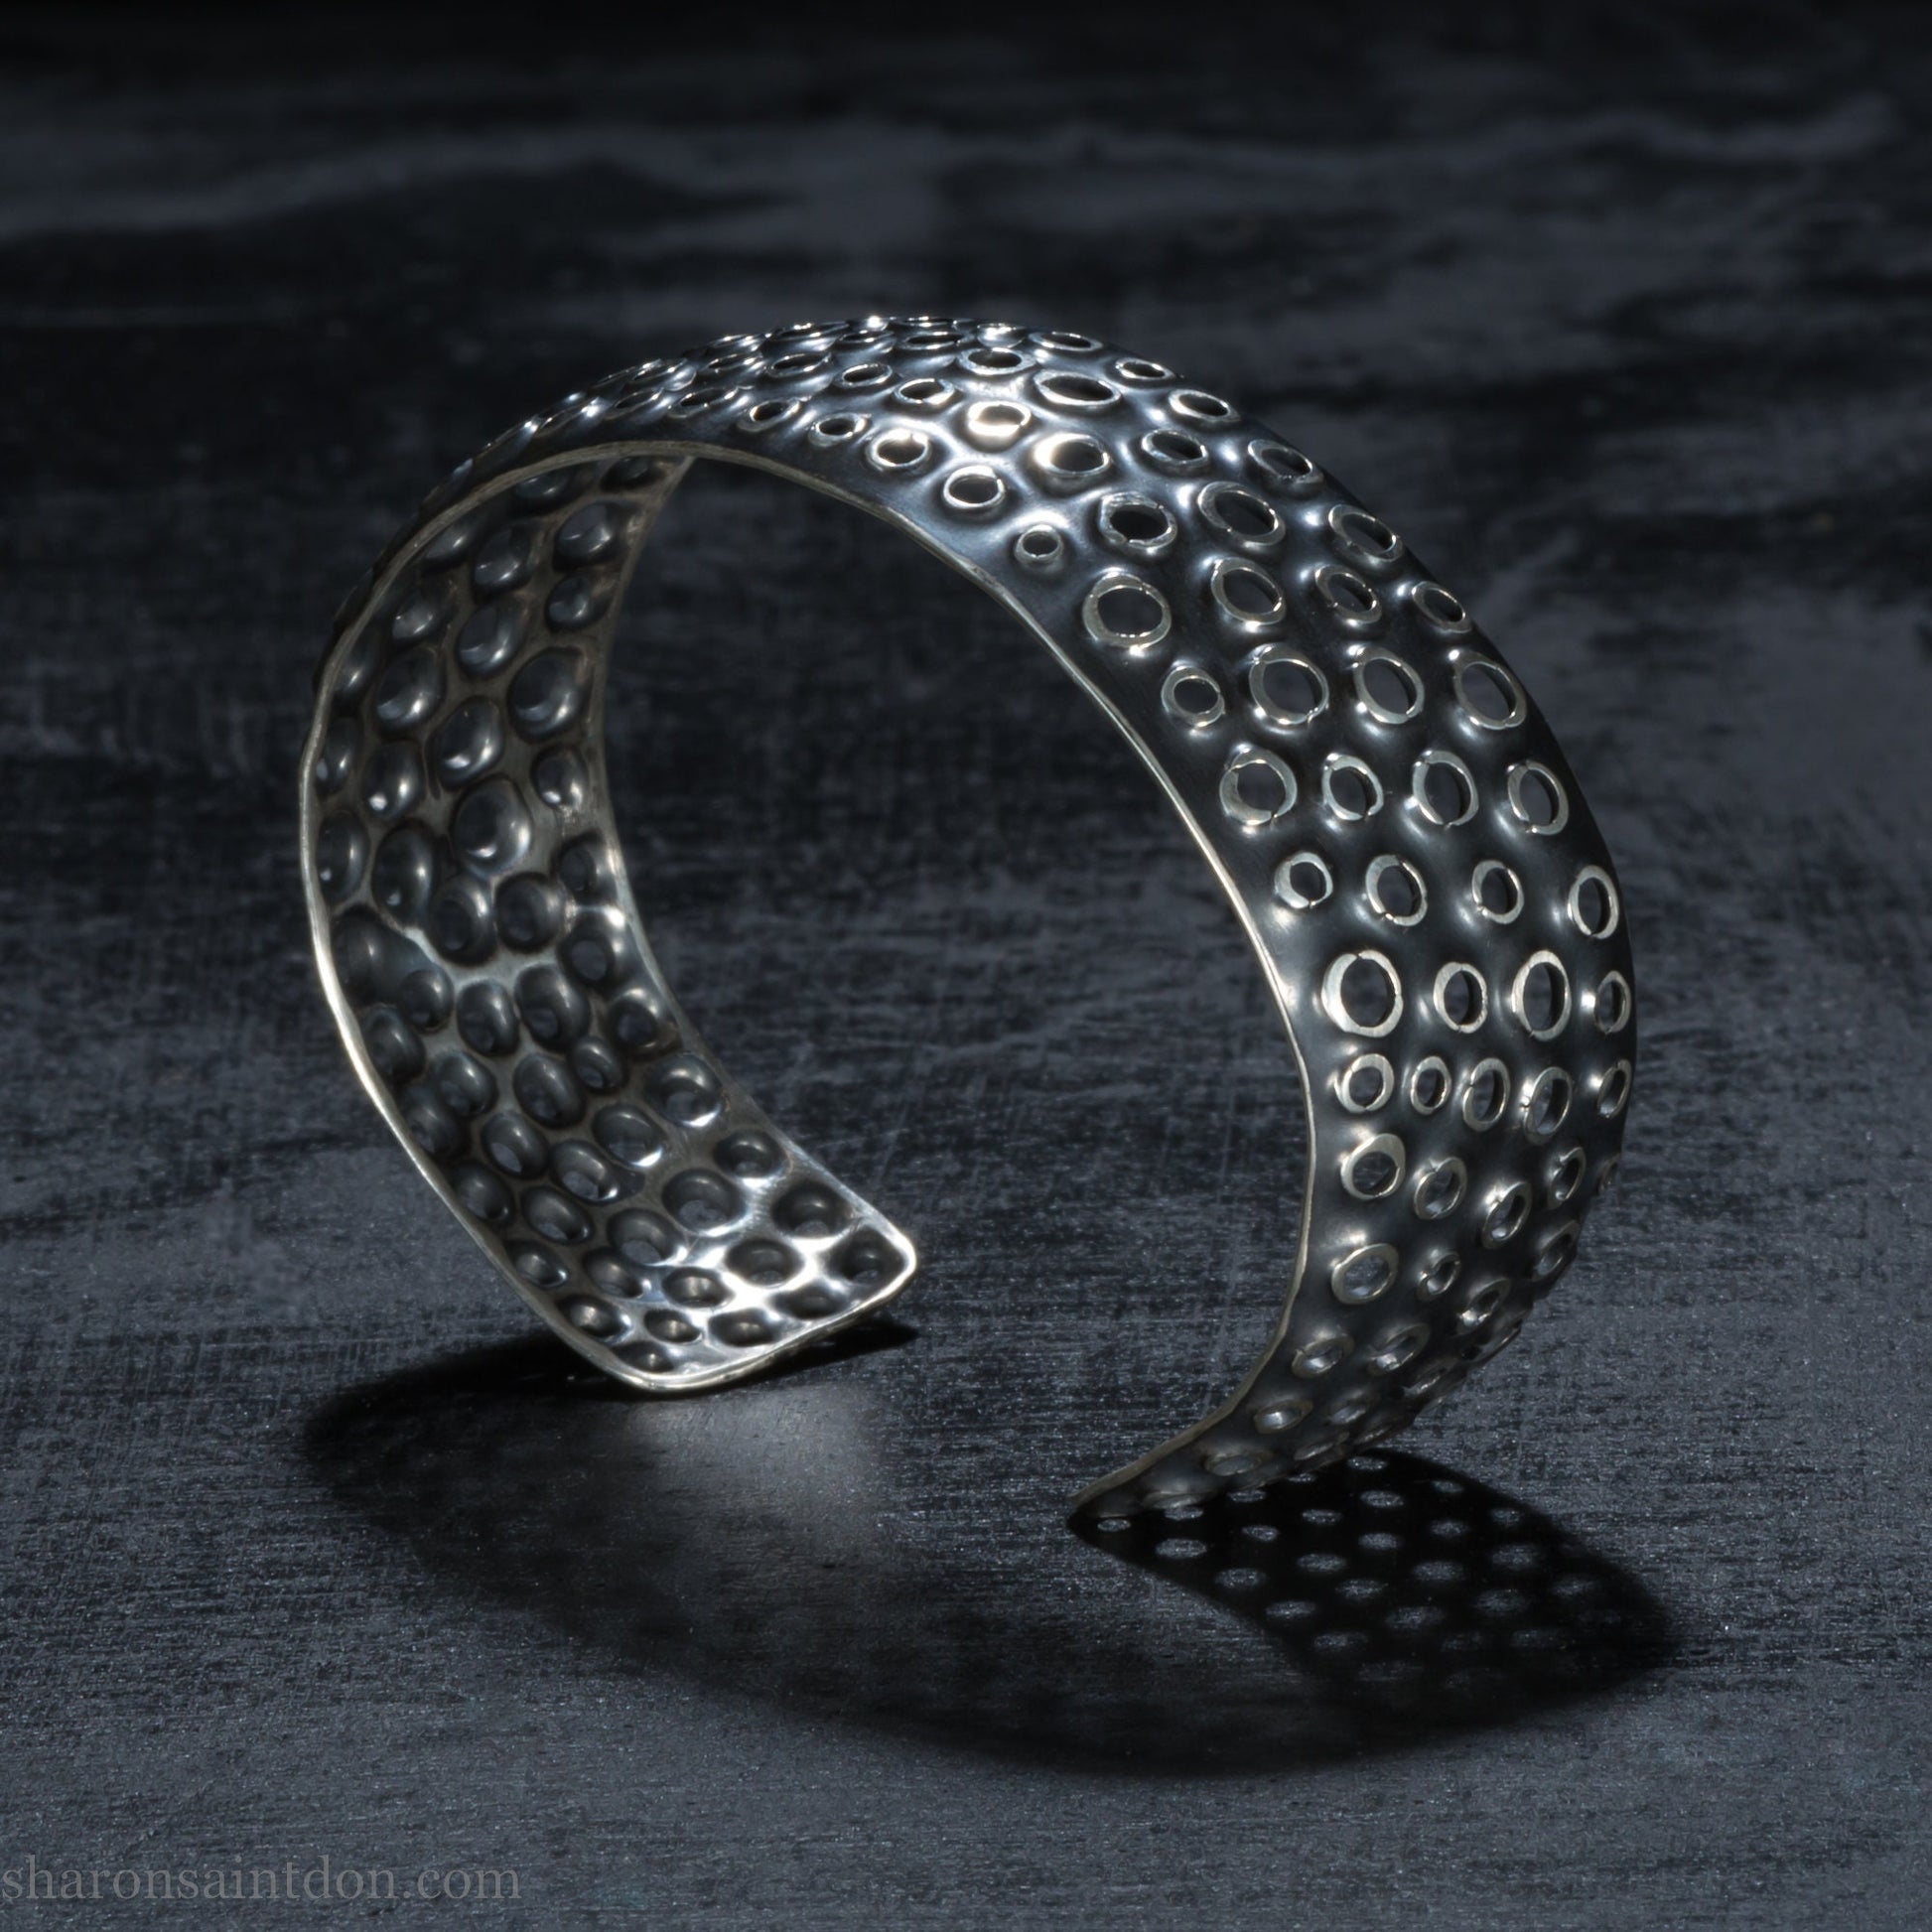 925 sterling silver cuff bracelet handmade in USA. 2cm wide, 40cm x 60cm oval with approximately 28mm flexible opening for wrist. Punched perforated hole texture, oxidized black and rubbed back to show circles as white shiny silver.